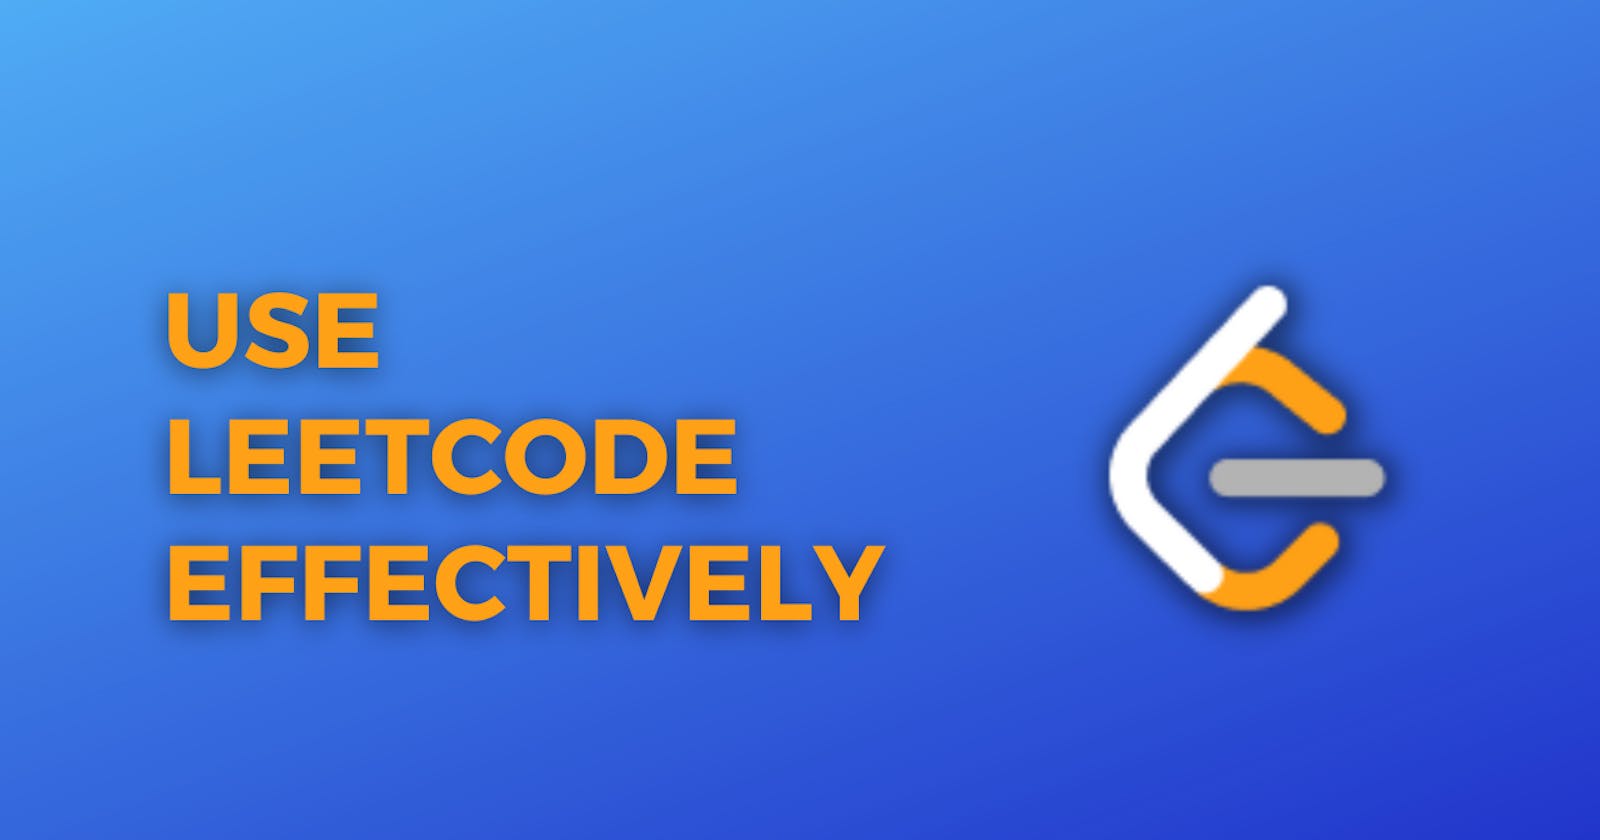 How to use Leetcode effectively